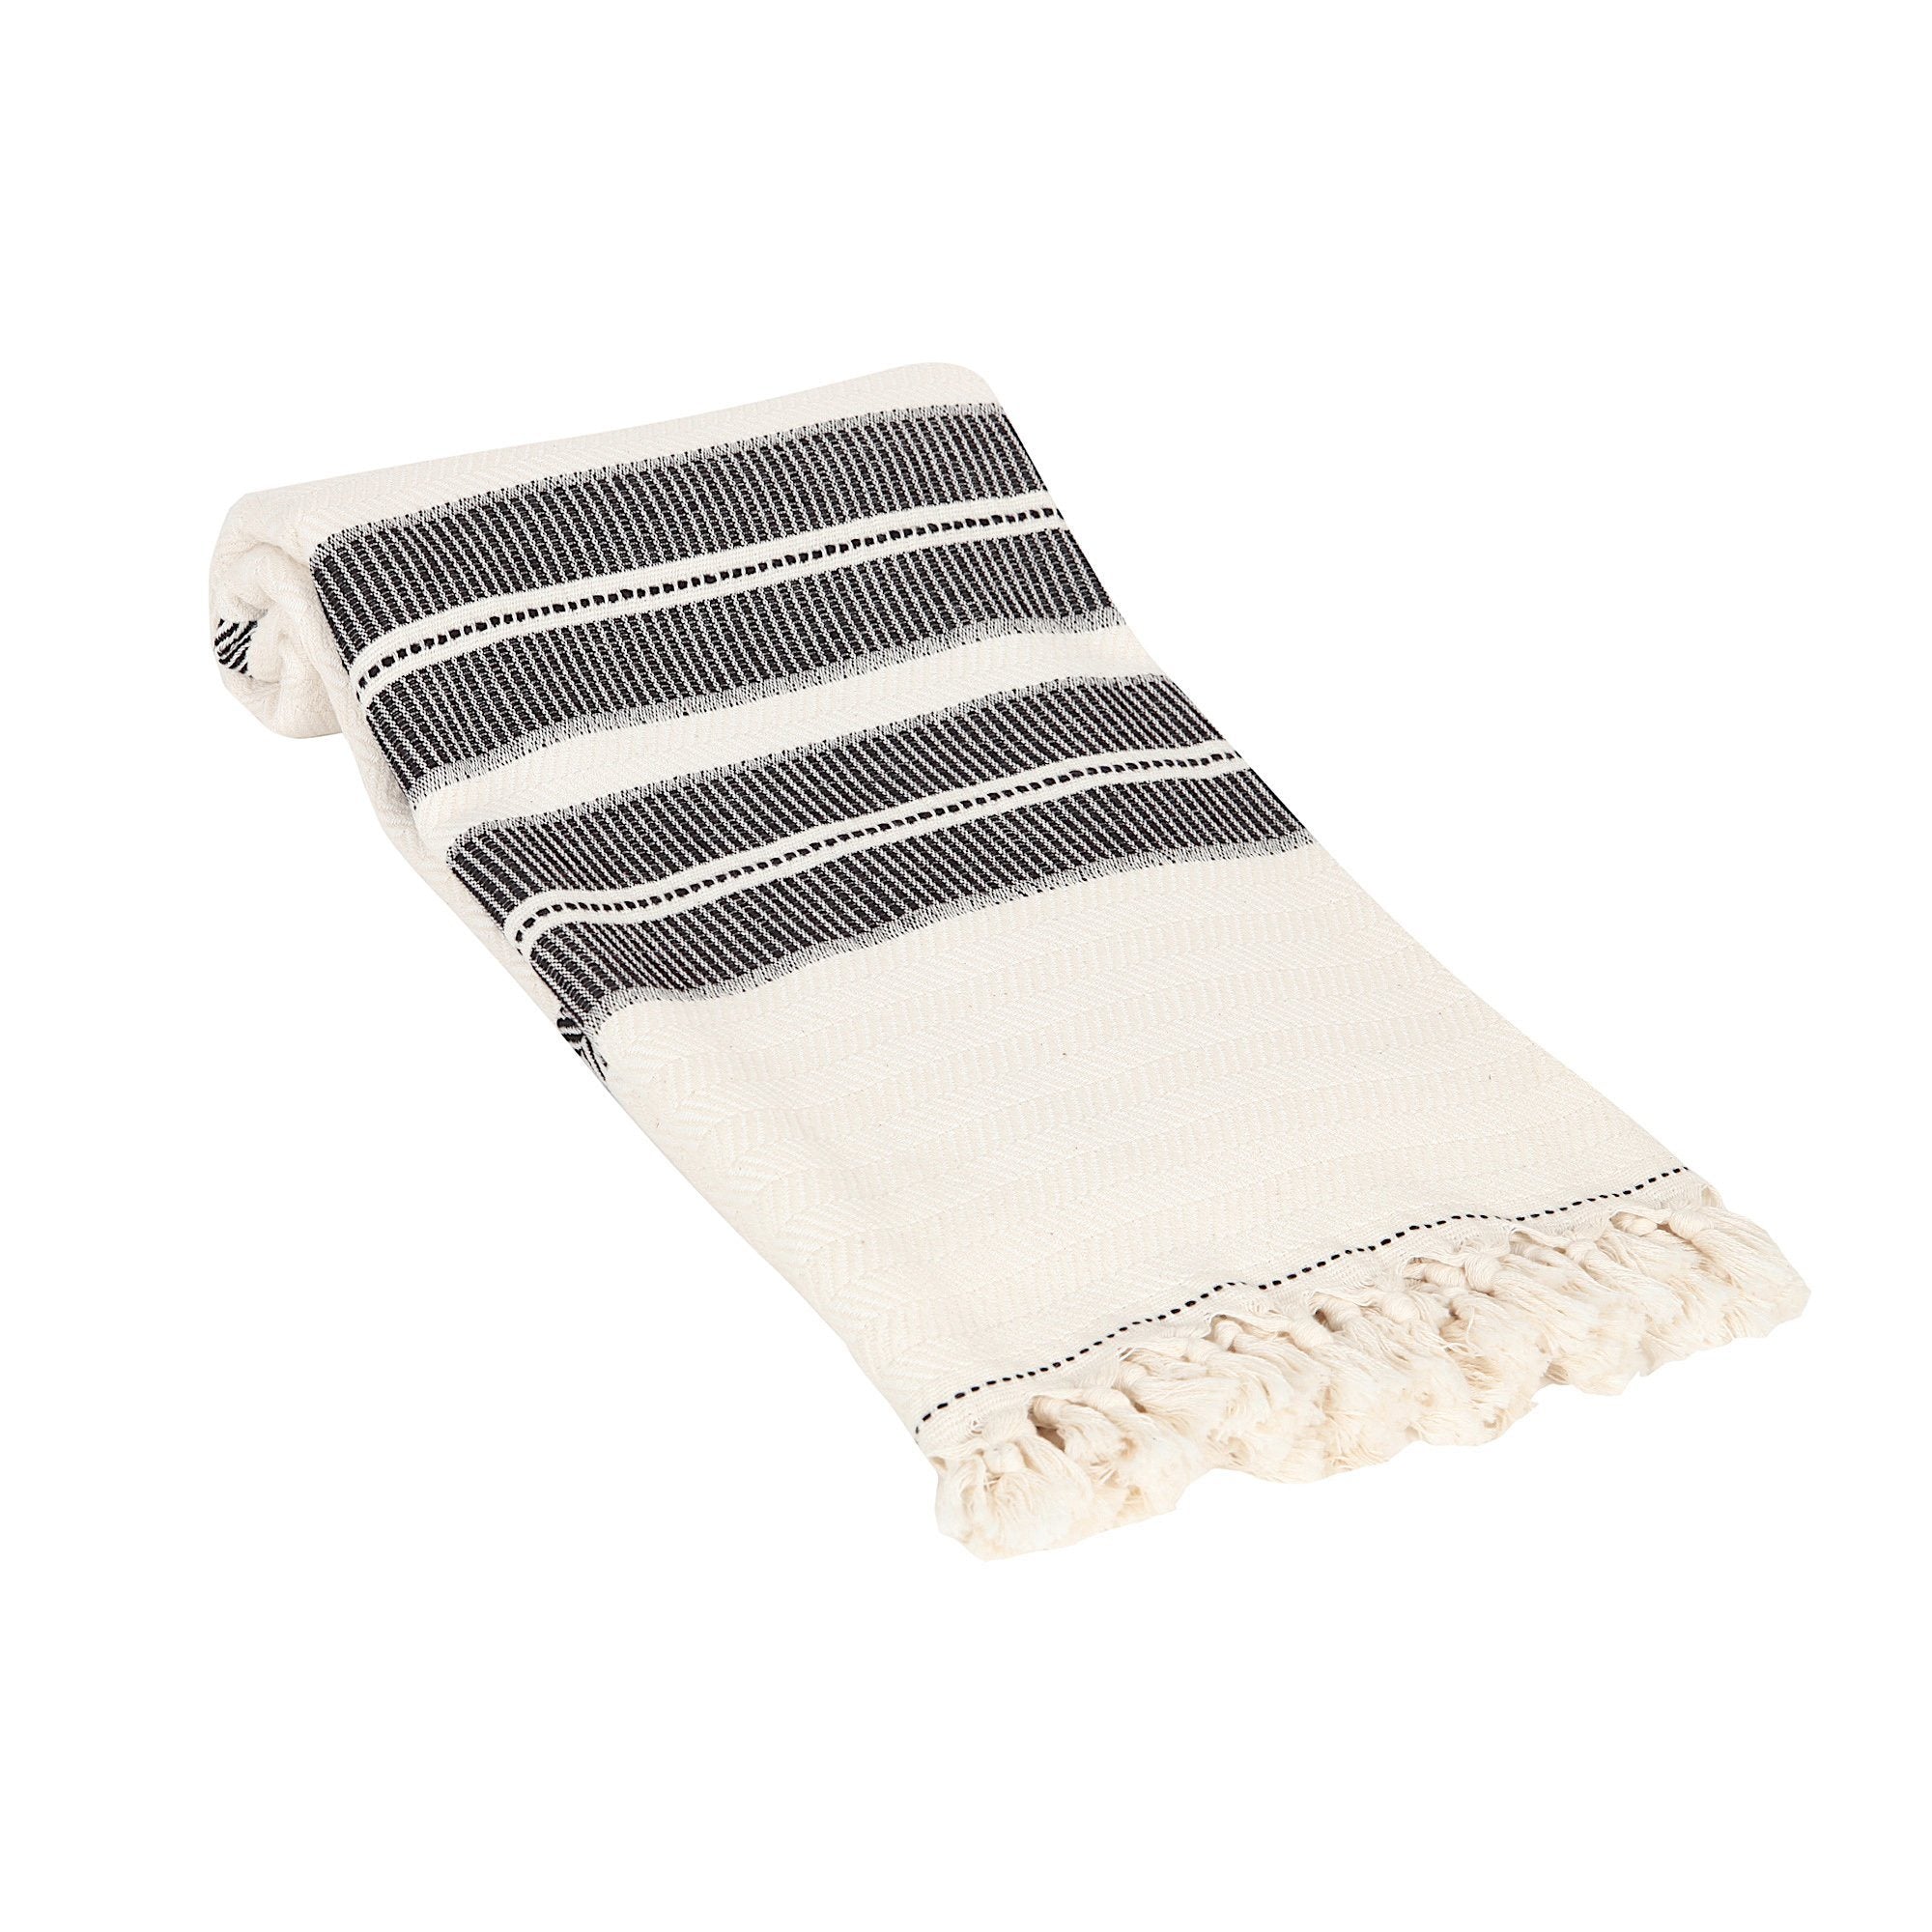 3 Piece Turkish Towel Set for Bathroom, 1 Bath Towel, 2 Hand Towels, Off  White Cotton Bath Towels with Black Stripes,Turkish Peshtemal Towel and  Hand Towels with Fringe